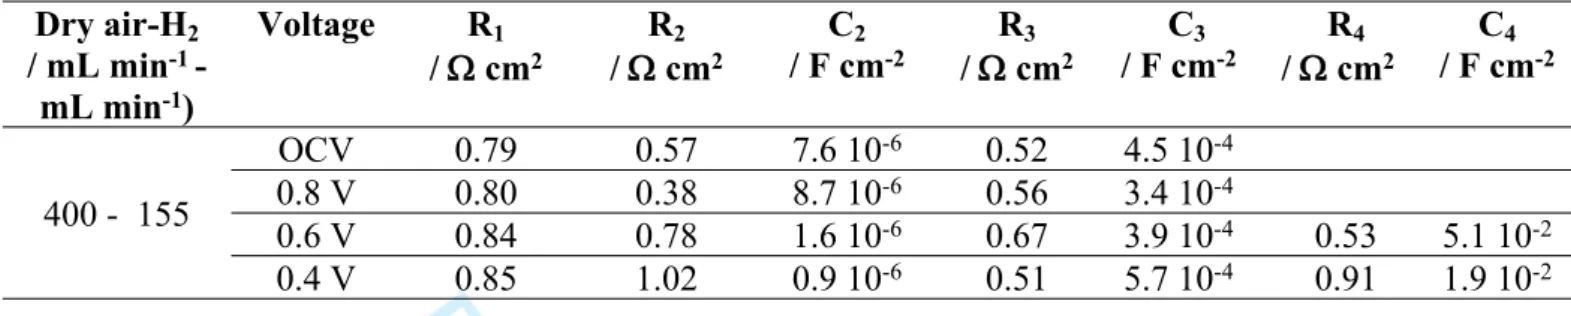 Table 5: Values of R 2 , R 3 , R 4 , C 2 , C 3  and C 4  determined from impedance diagrams recorded at  850°C for different wet H 2  and dry air flow rates after operation under wet air.